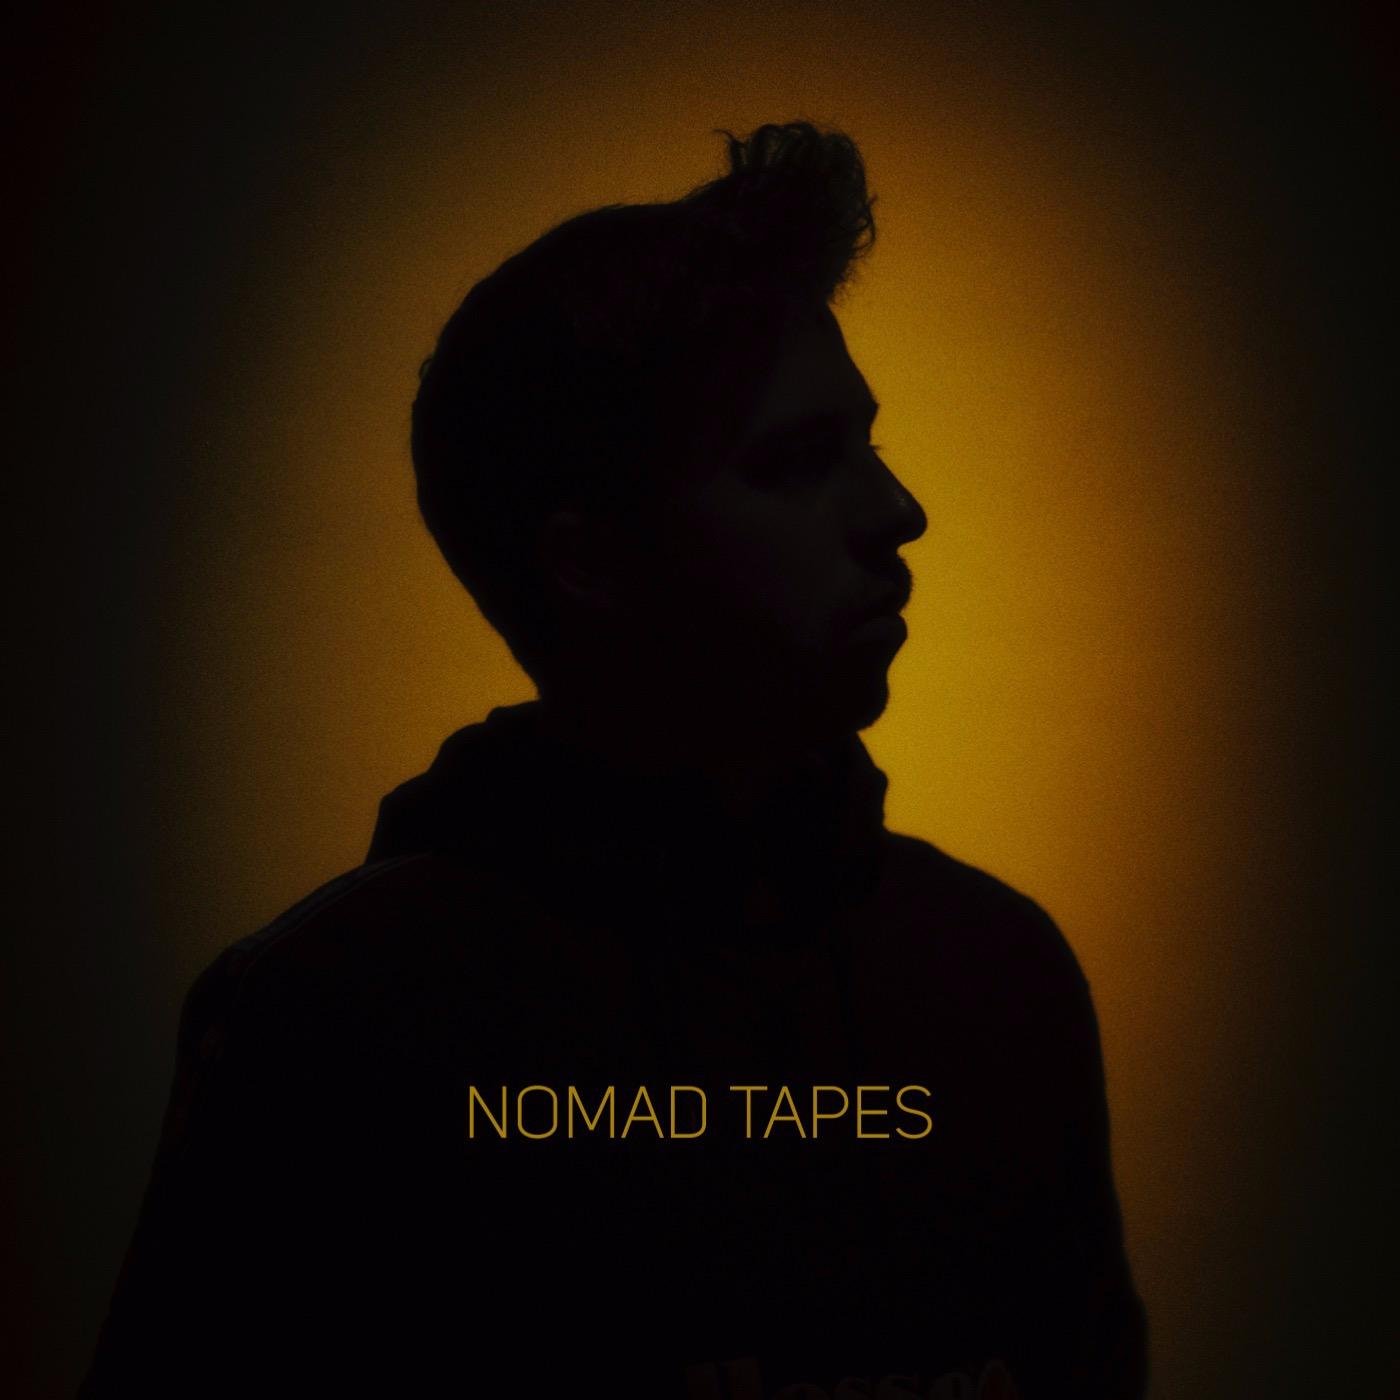 Nomad Tapes